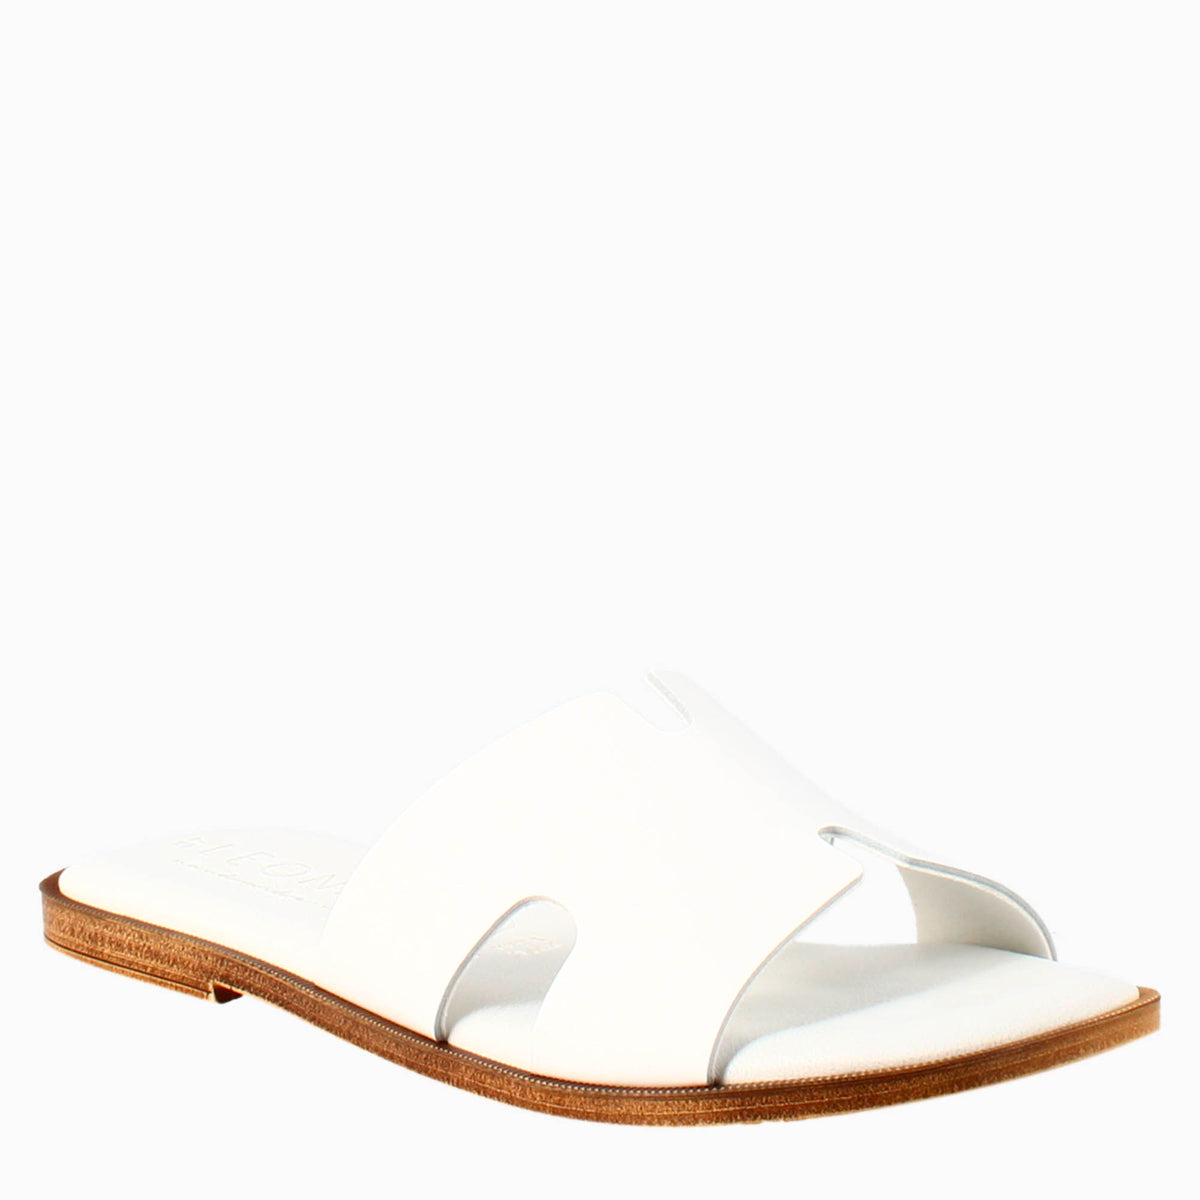 Women's H-shaped sandals in white leather